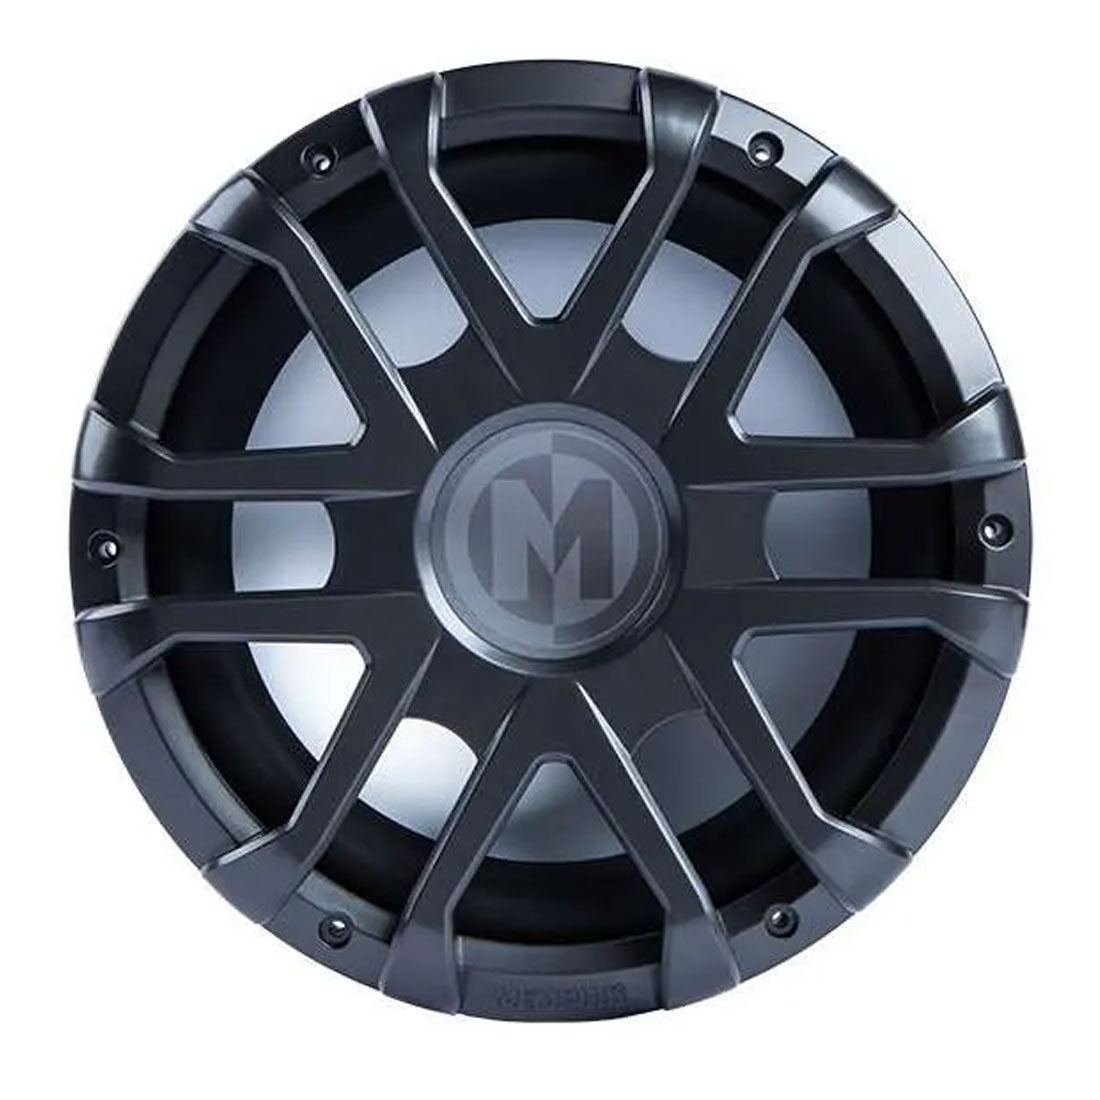 Memphis Audio MM1024 10" Marine Subwoofer – Selectable 1 or 2-ohm